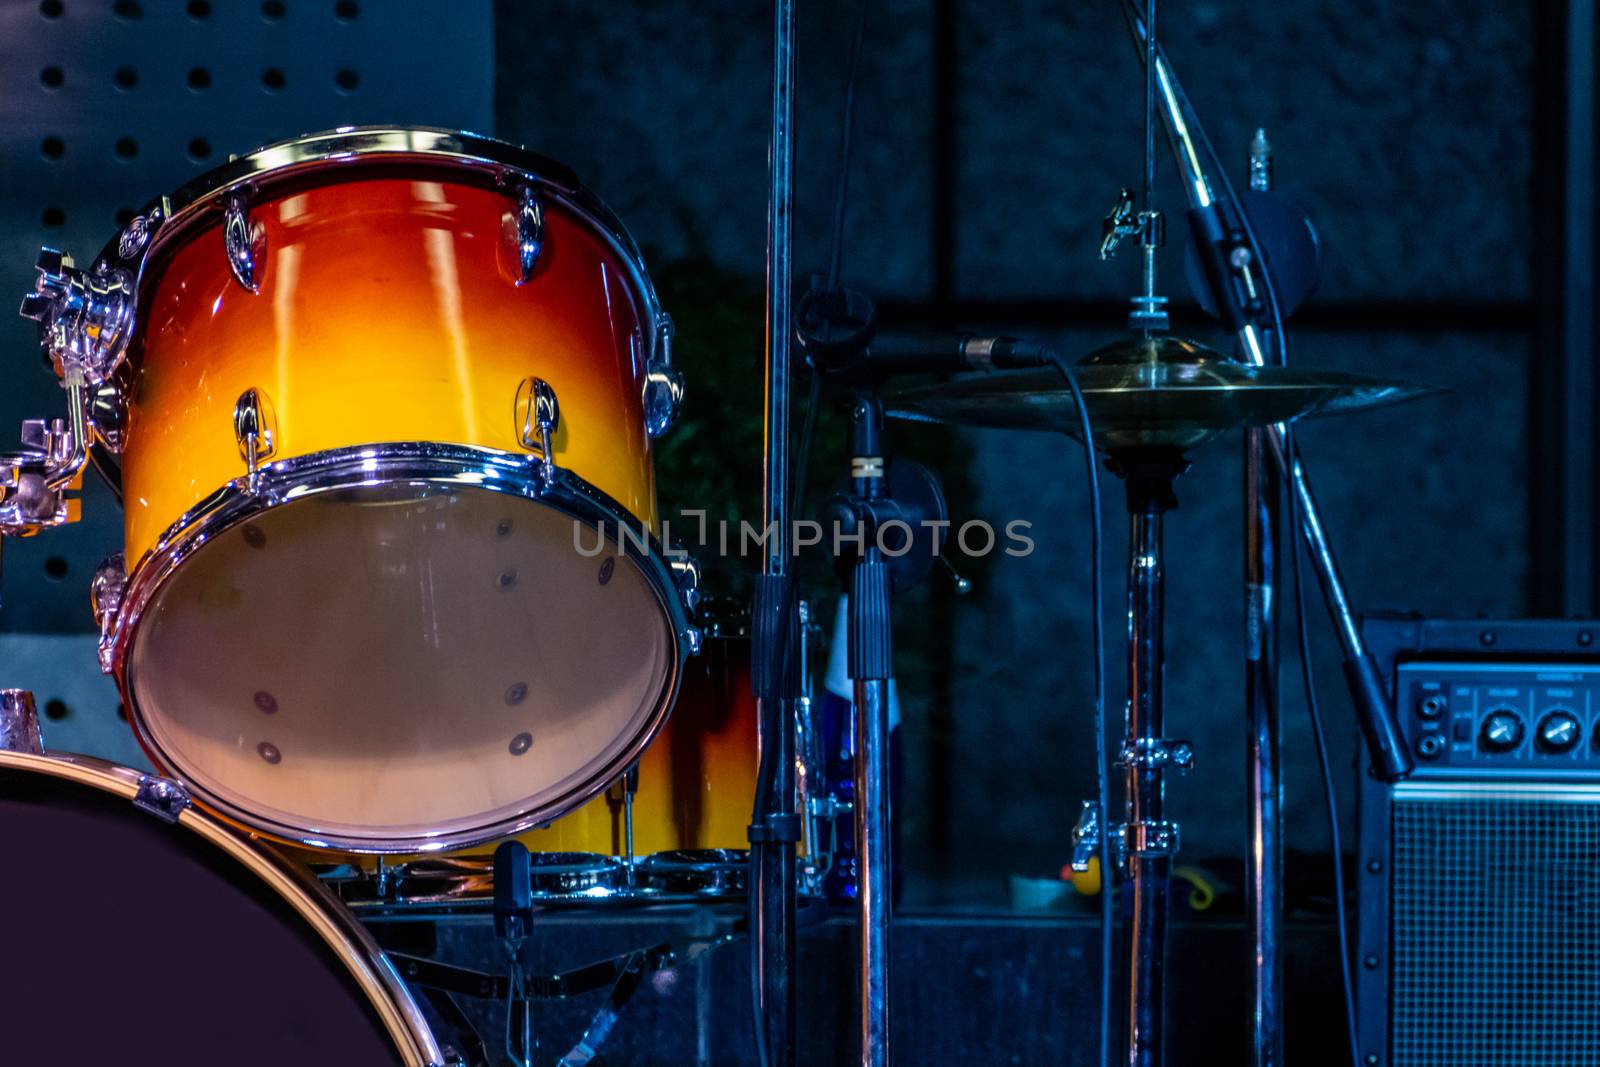 Close-up of drums on stage